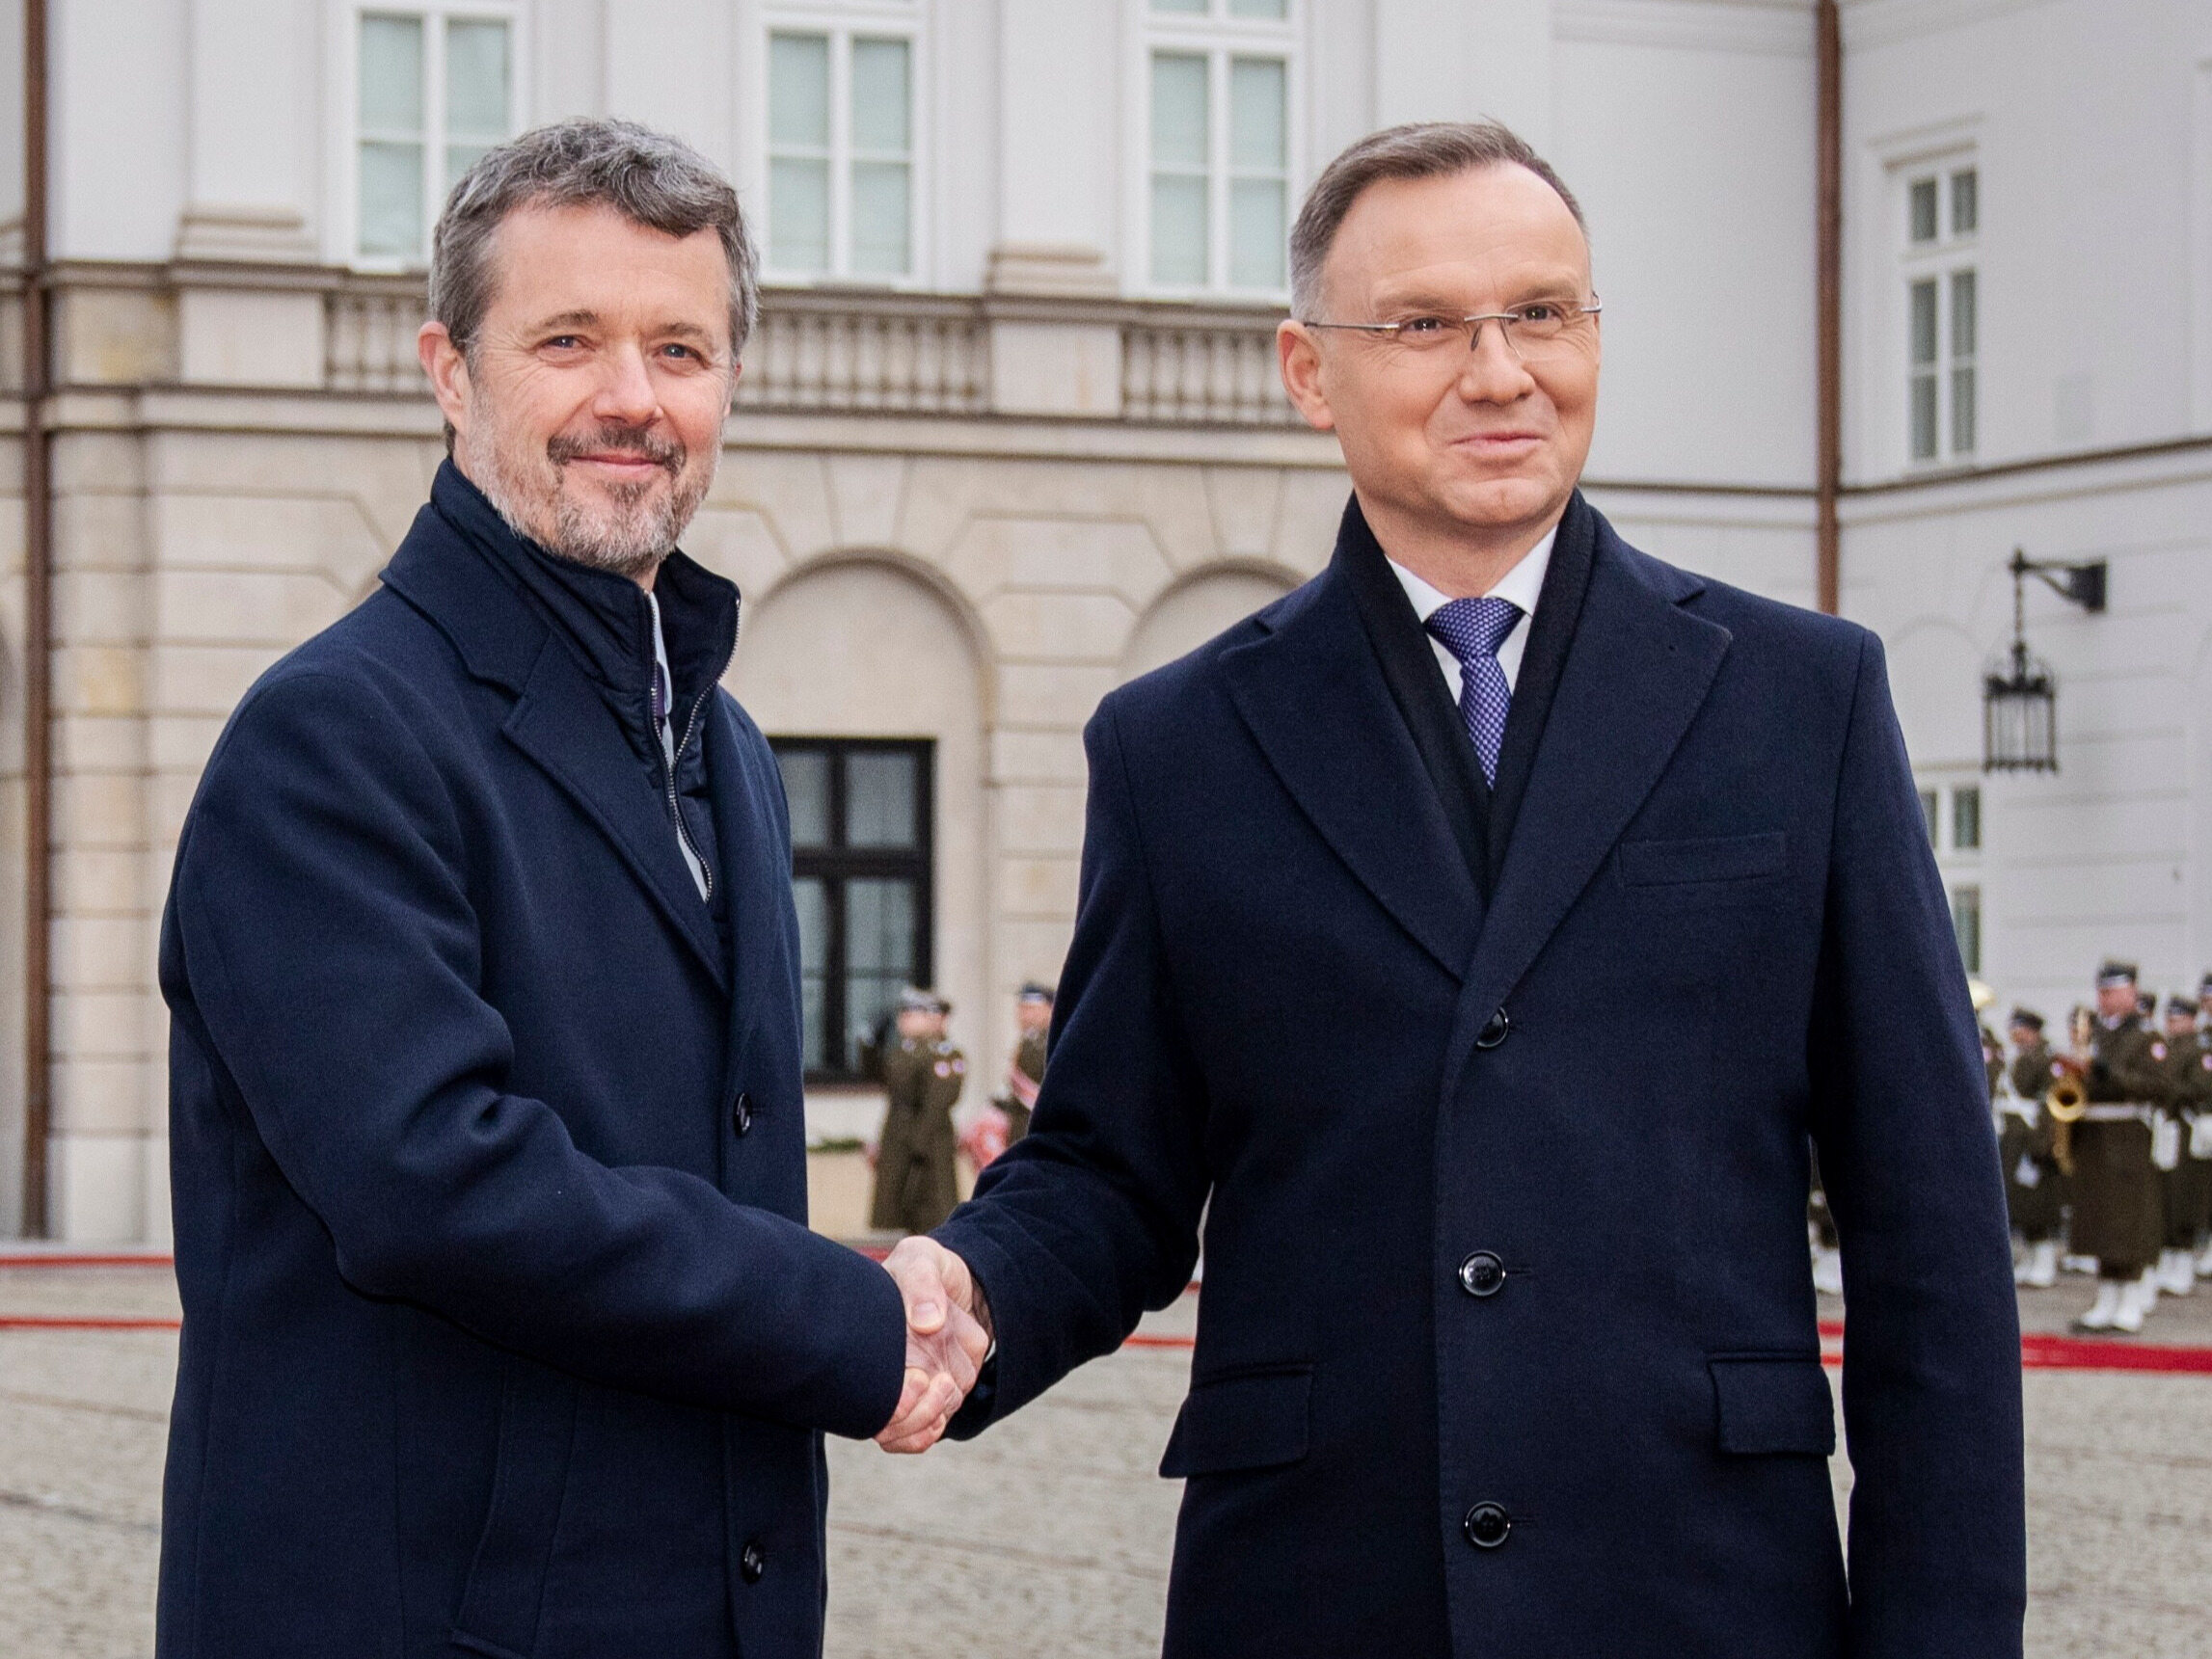 The King of Denmark is already in Poland.  This is his first visit abroad.  "This is a very important signal"